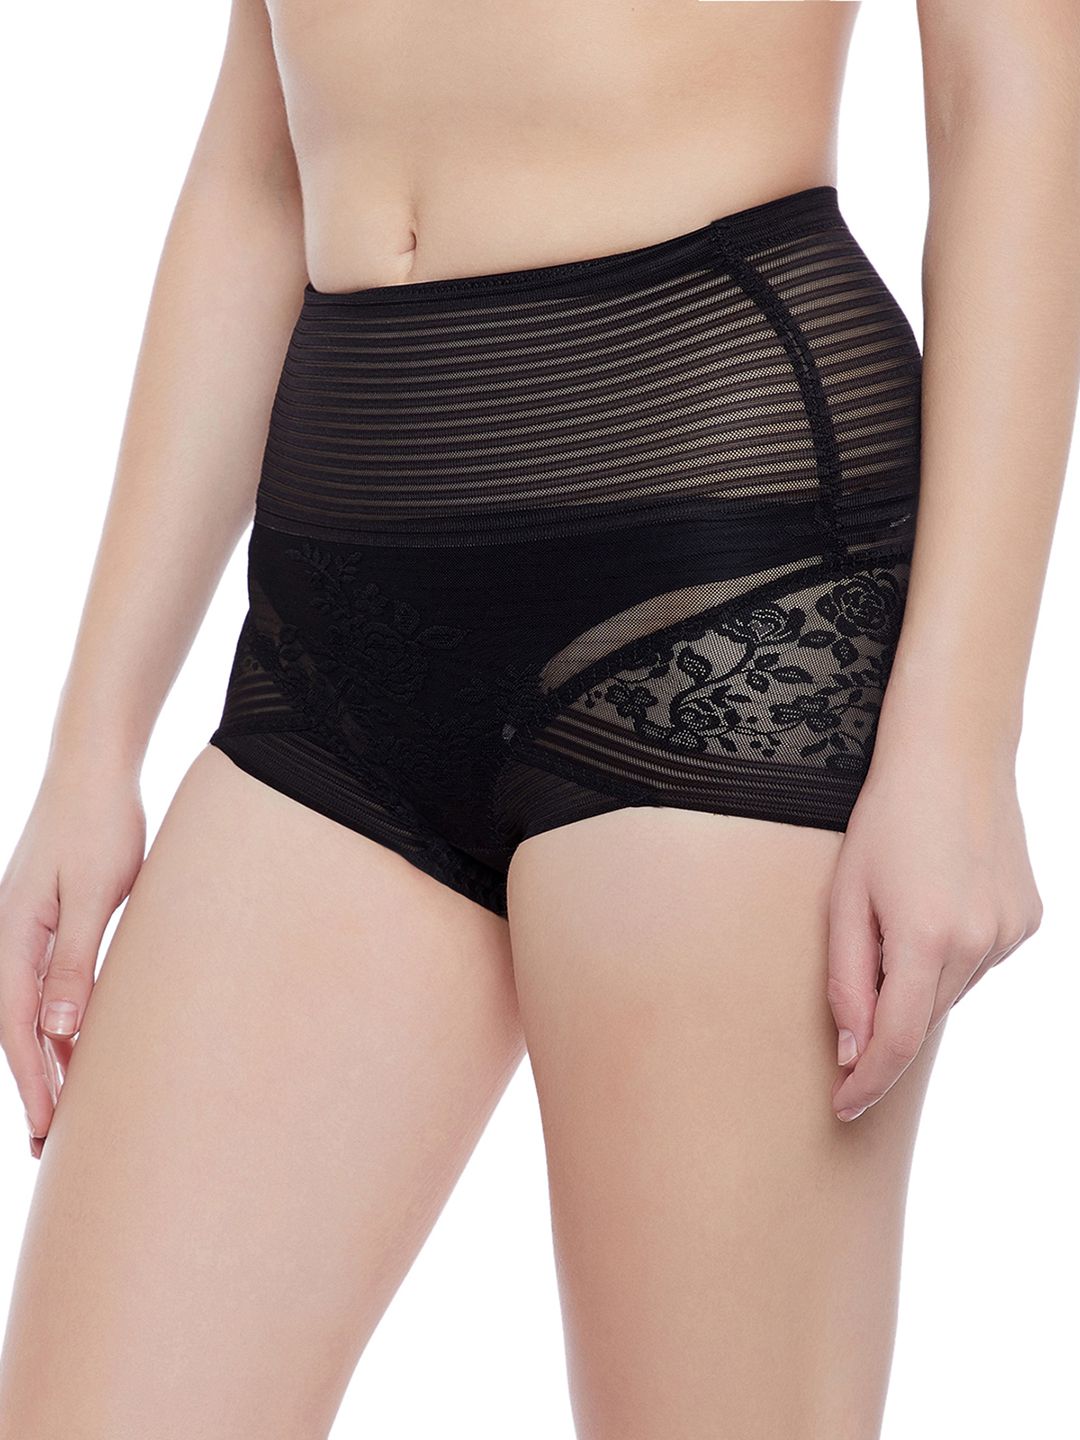 buy-clovia-tummy-tucker-shapewear-online-at-best-prices-in-india-snapdeal